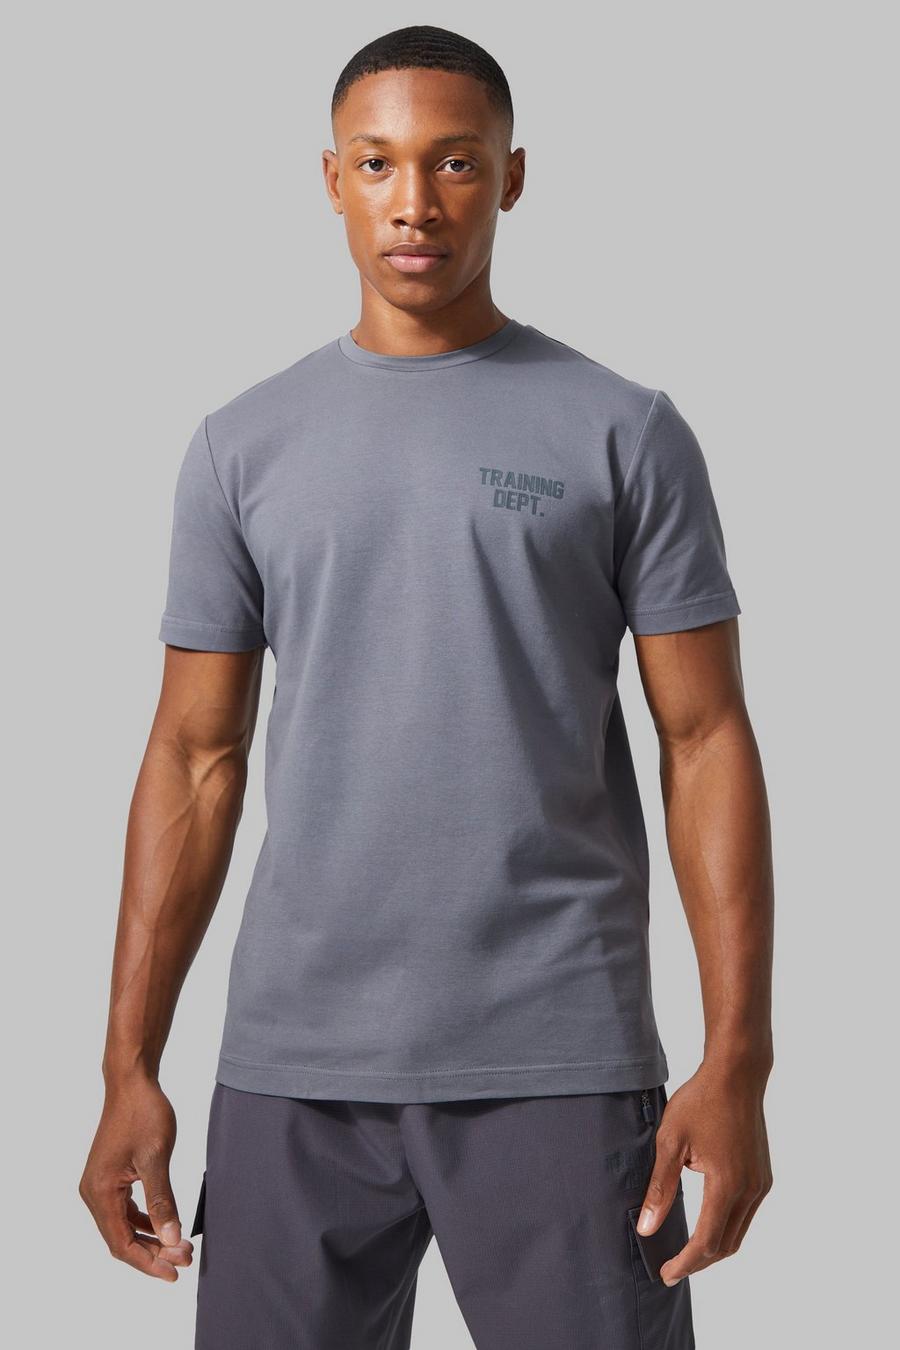 T-shirt Active Training Dept per alta performance, Charcoal image number 1